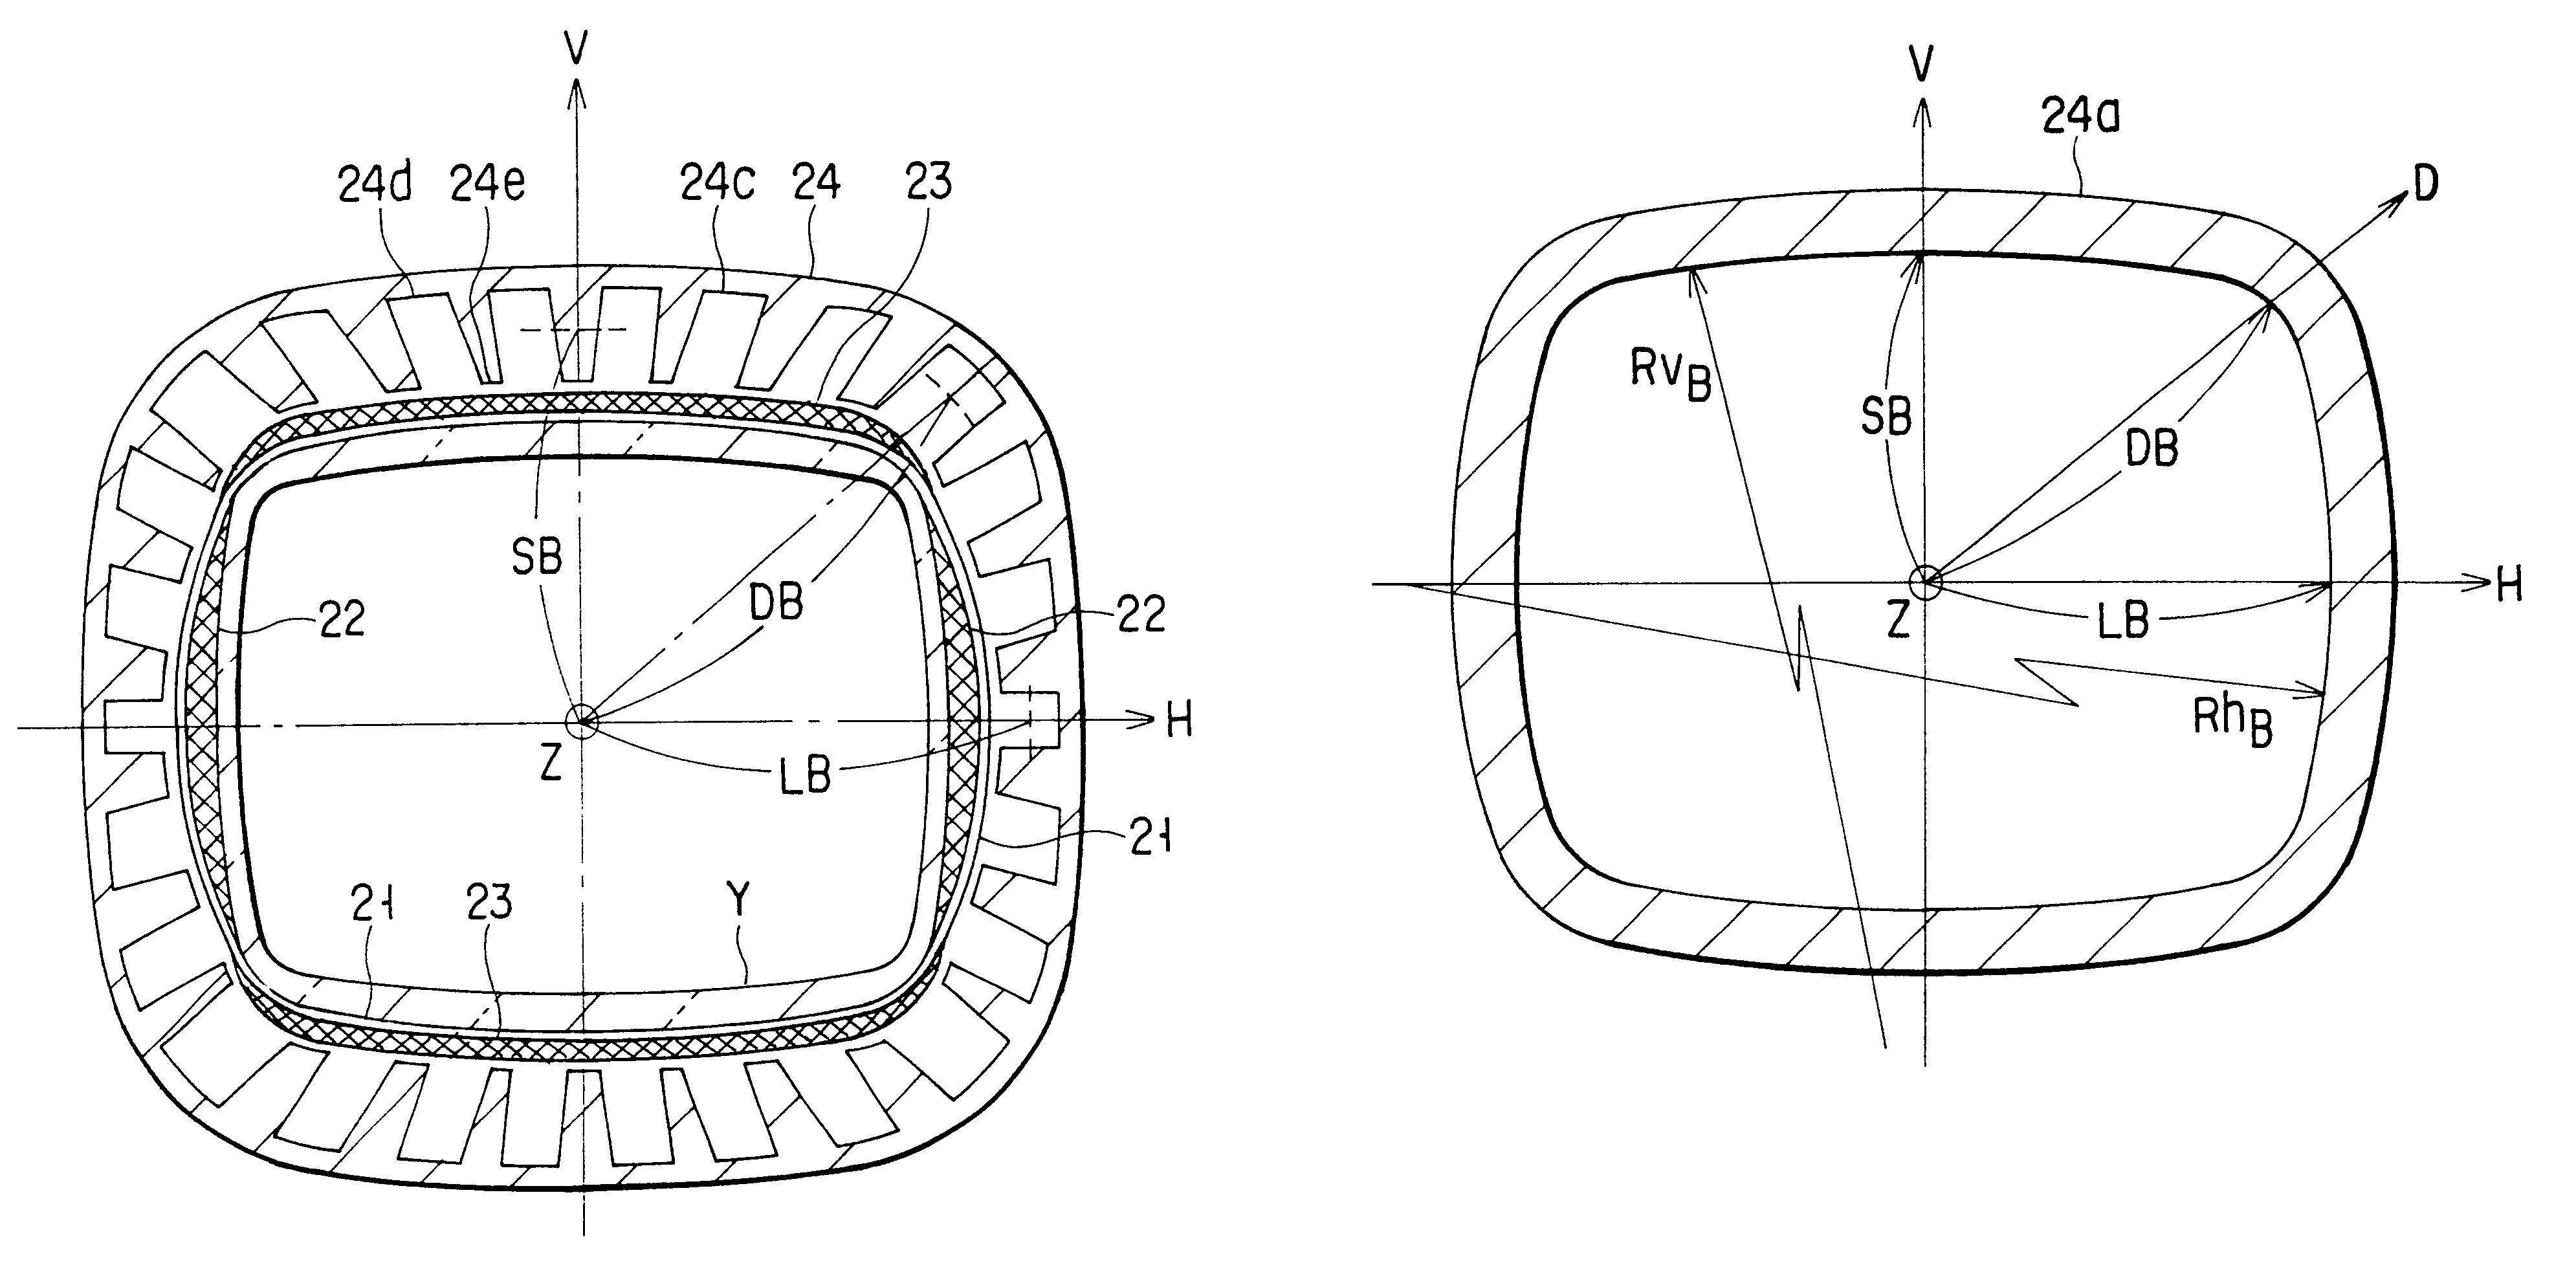 Cathode-ray tube device comprising a deflection yoke with a non-circular core having specified dimensional relationships